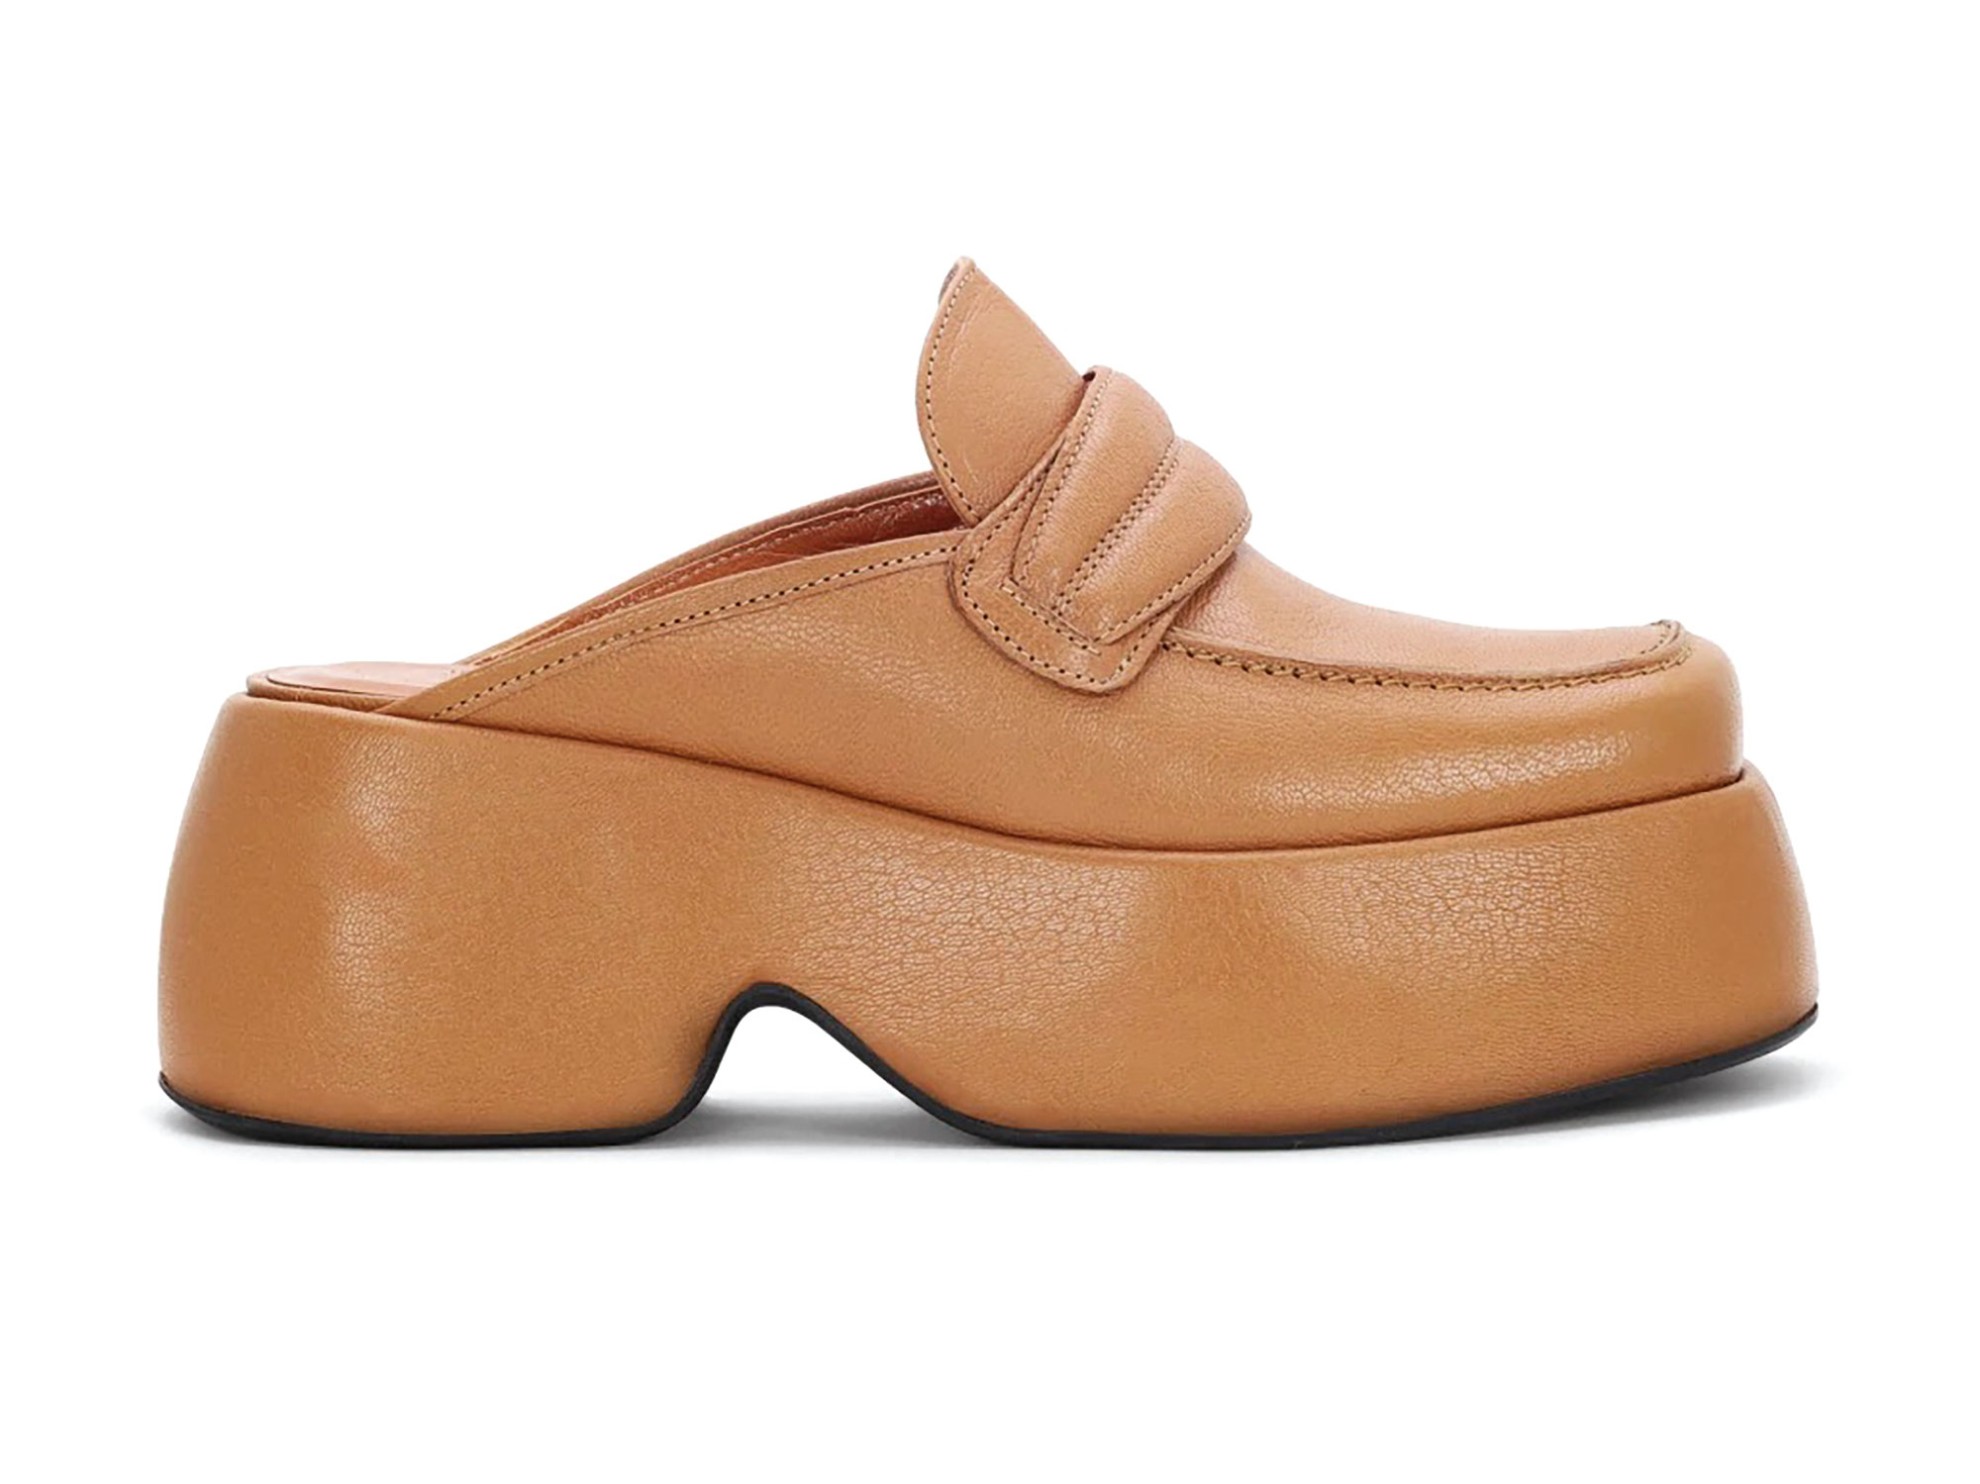 Fashion clogs: With distinguished materials